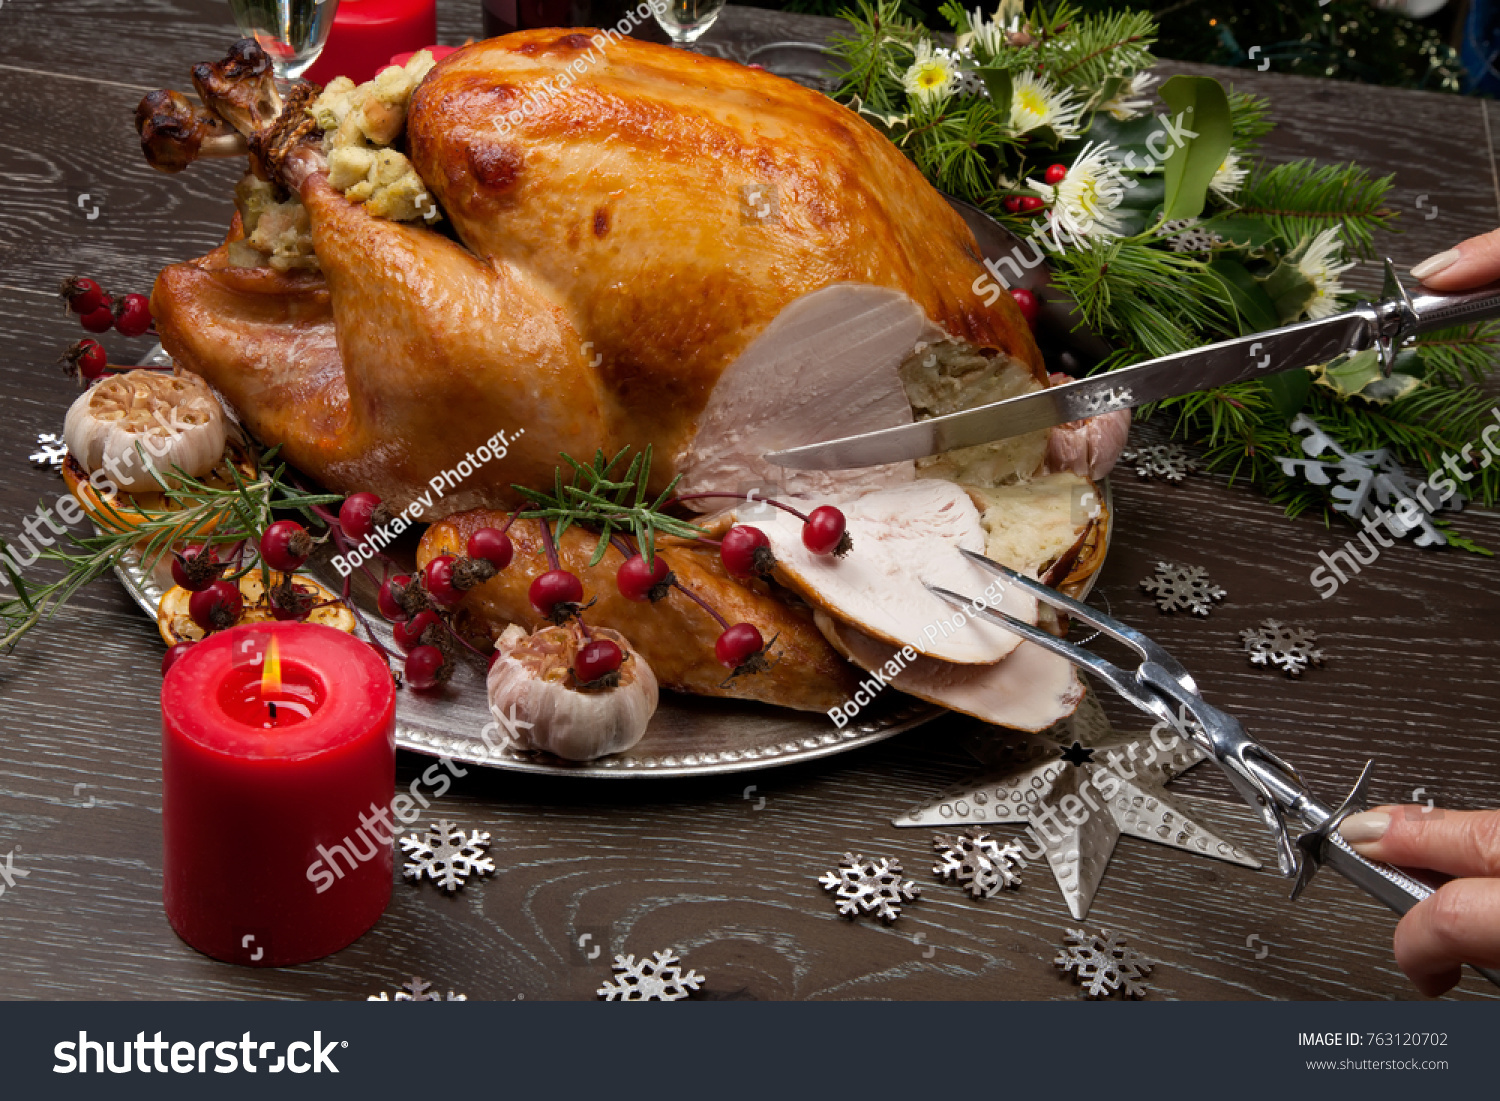 Carving Rustic Style Roasted Christmas Turkey Stock Photo 763120702 ...